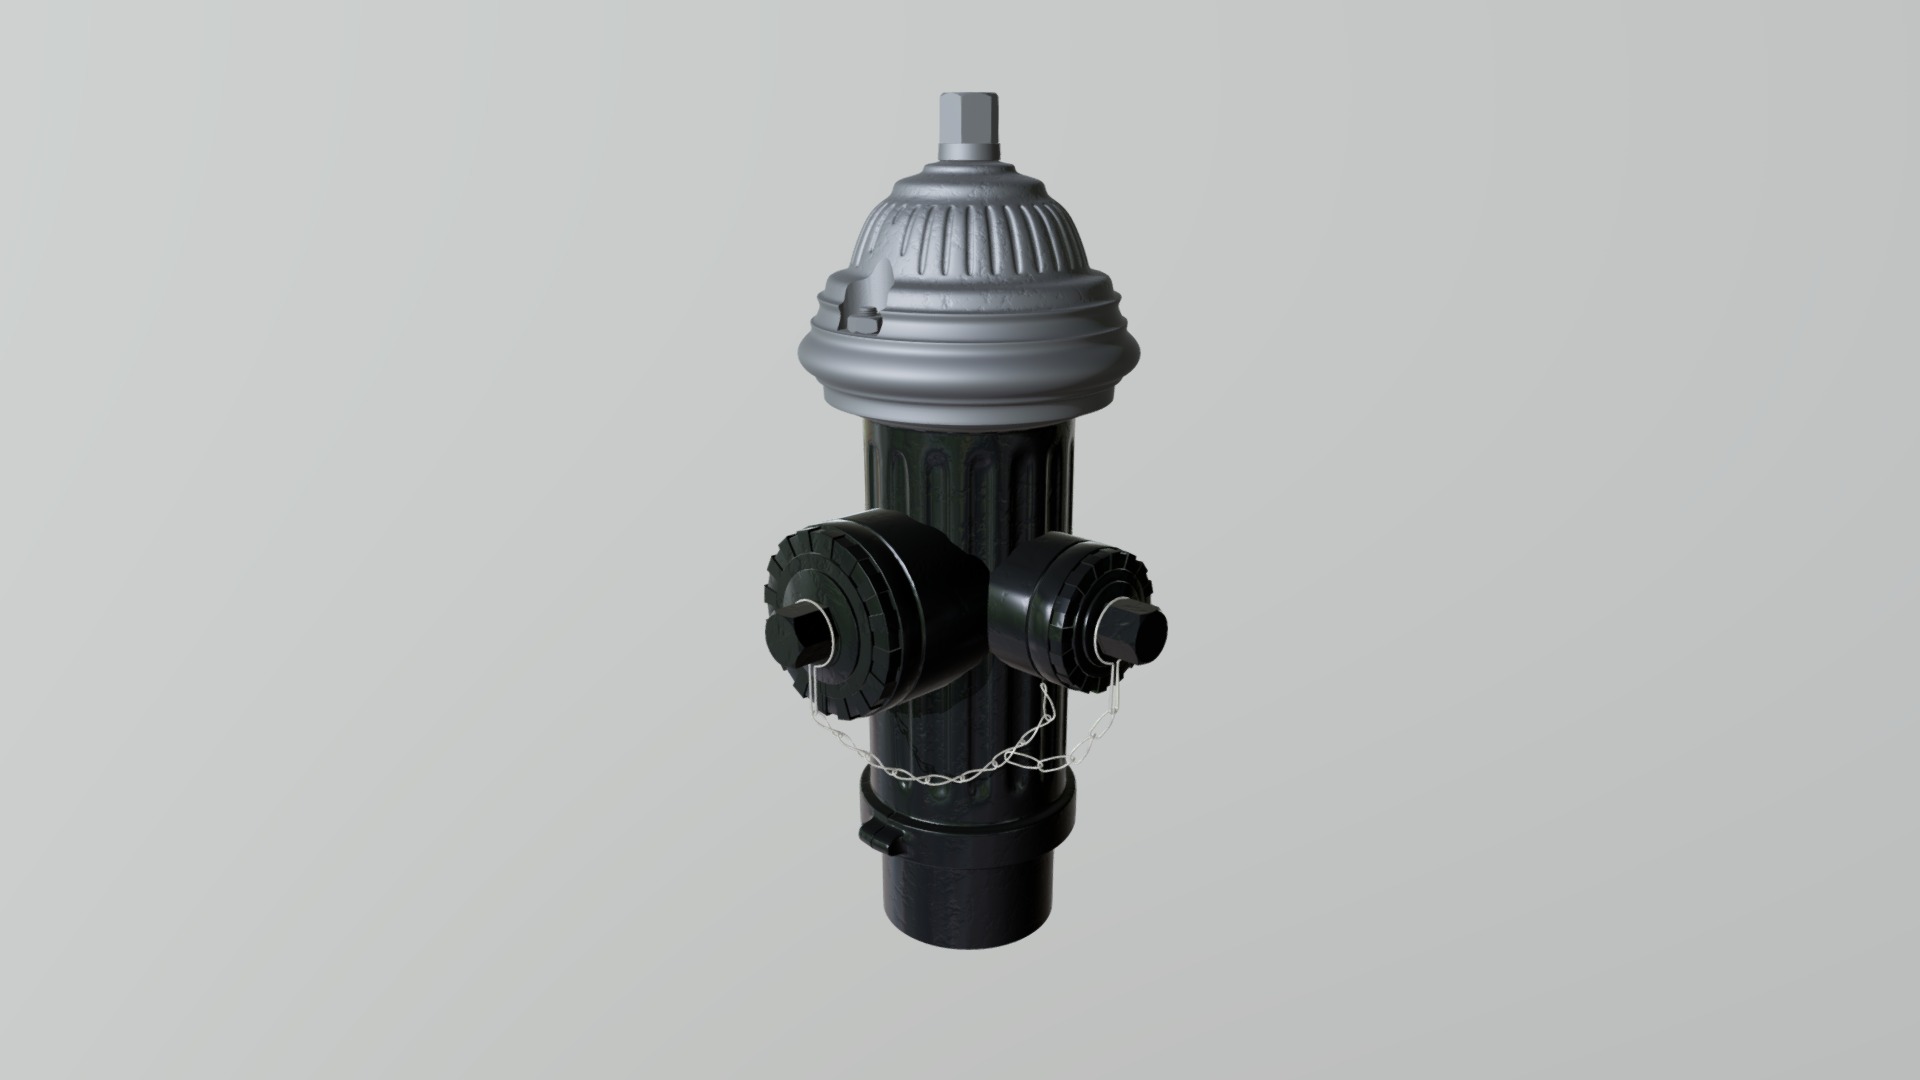 3D model Fire Hydrant - This is a 3D model of the Fire Hydrant. The 3D model is about a black fire hydrant.